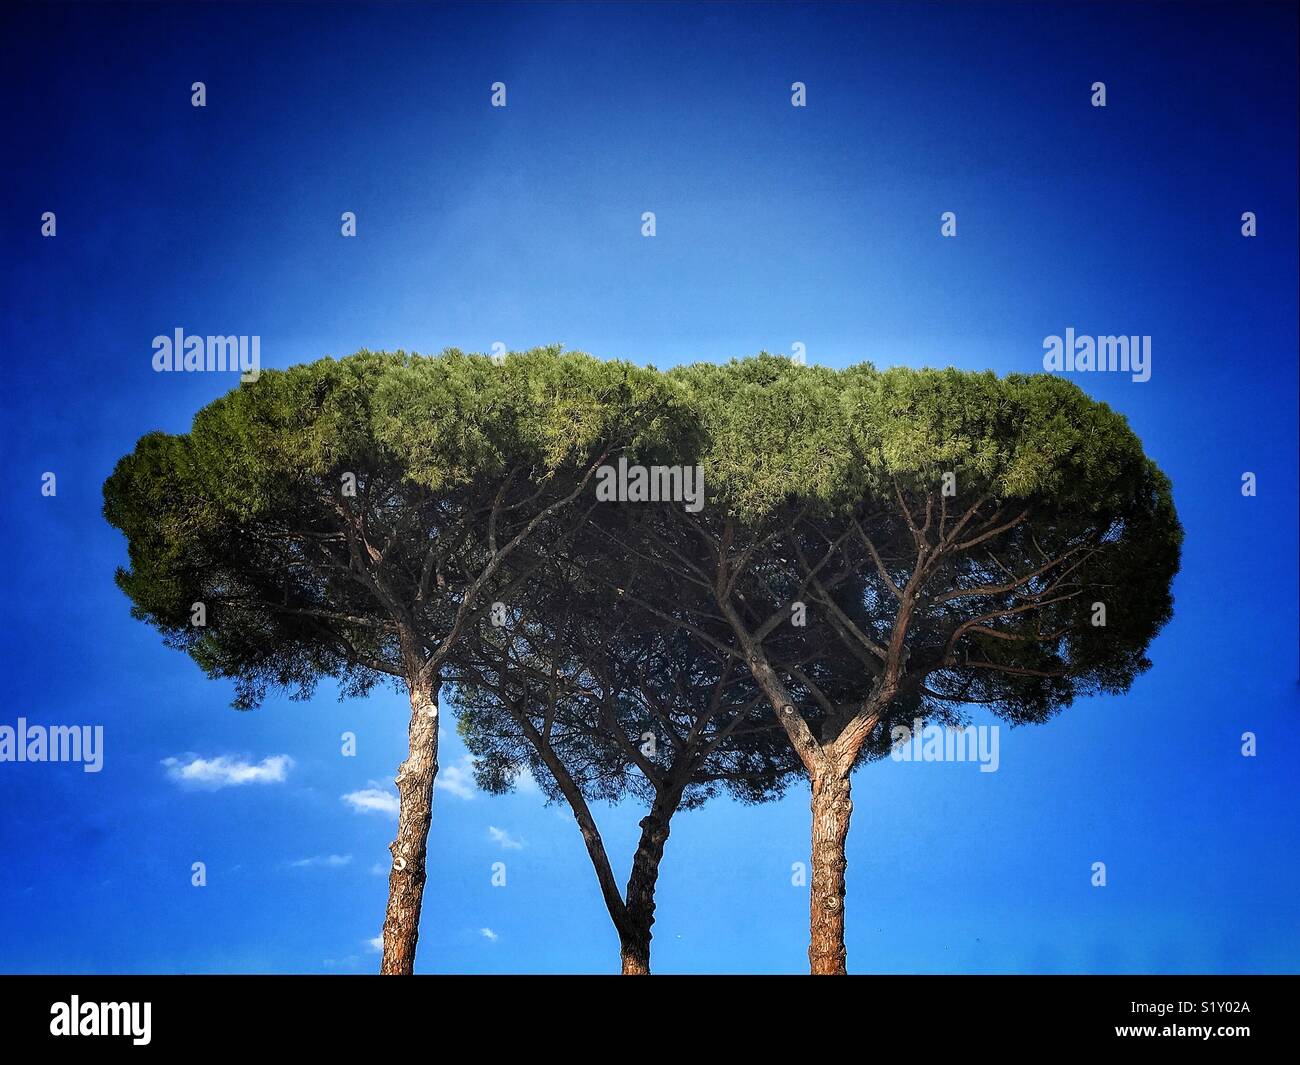 Umbrella pine trees, photographed an almost clear blue sky in Rome, Italy Stock Photo